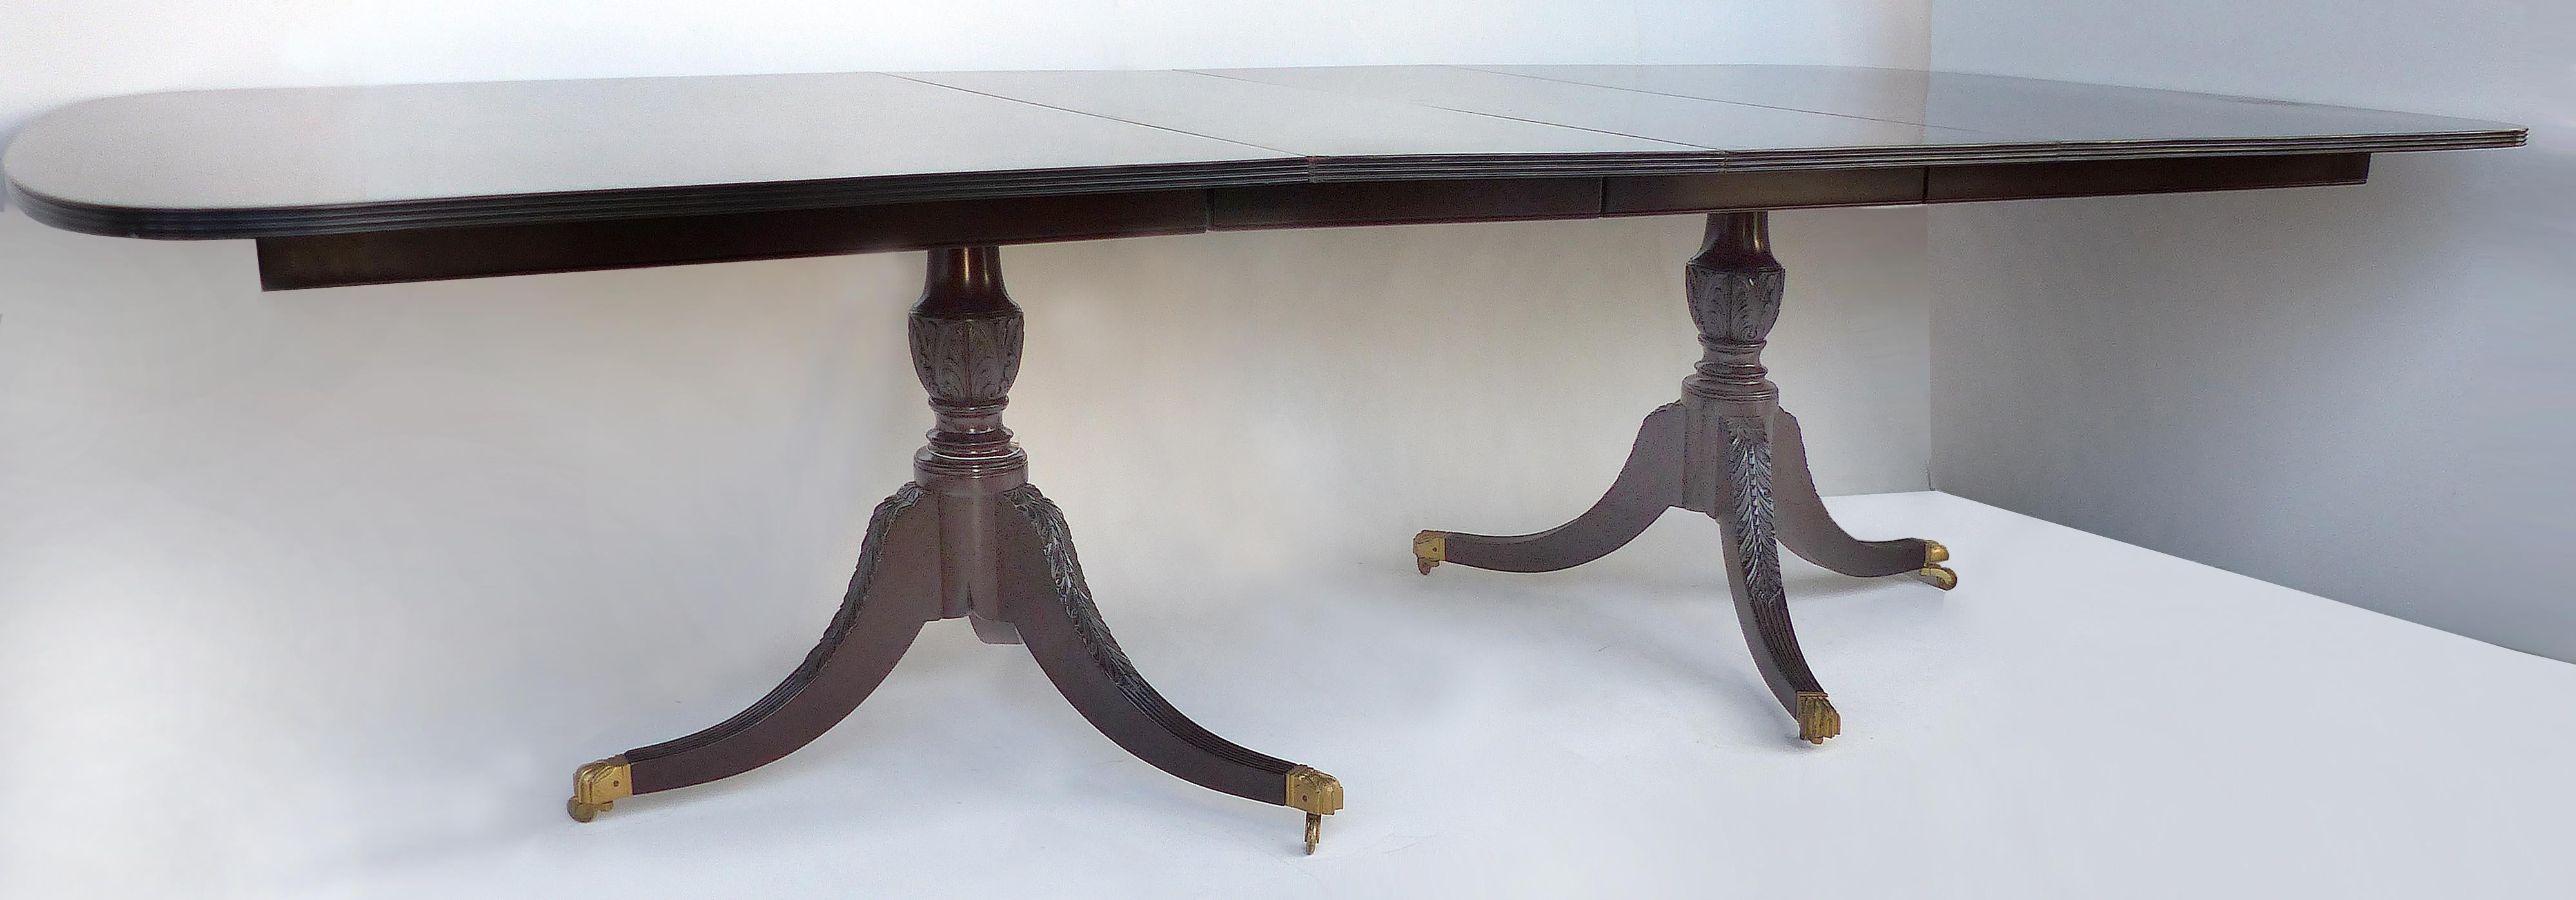 Georgian Late 18th Century Mahogany Double Pedestal Dining Table with Leaves

Offered for sale is an antique late 18th century Georgian double pedestal mahogany dining table with two leaves that each measure 18.5